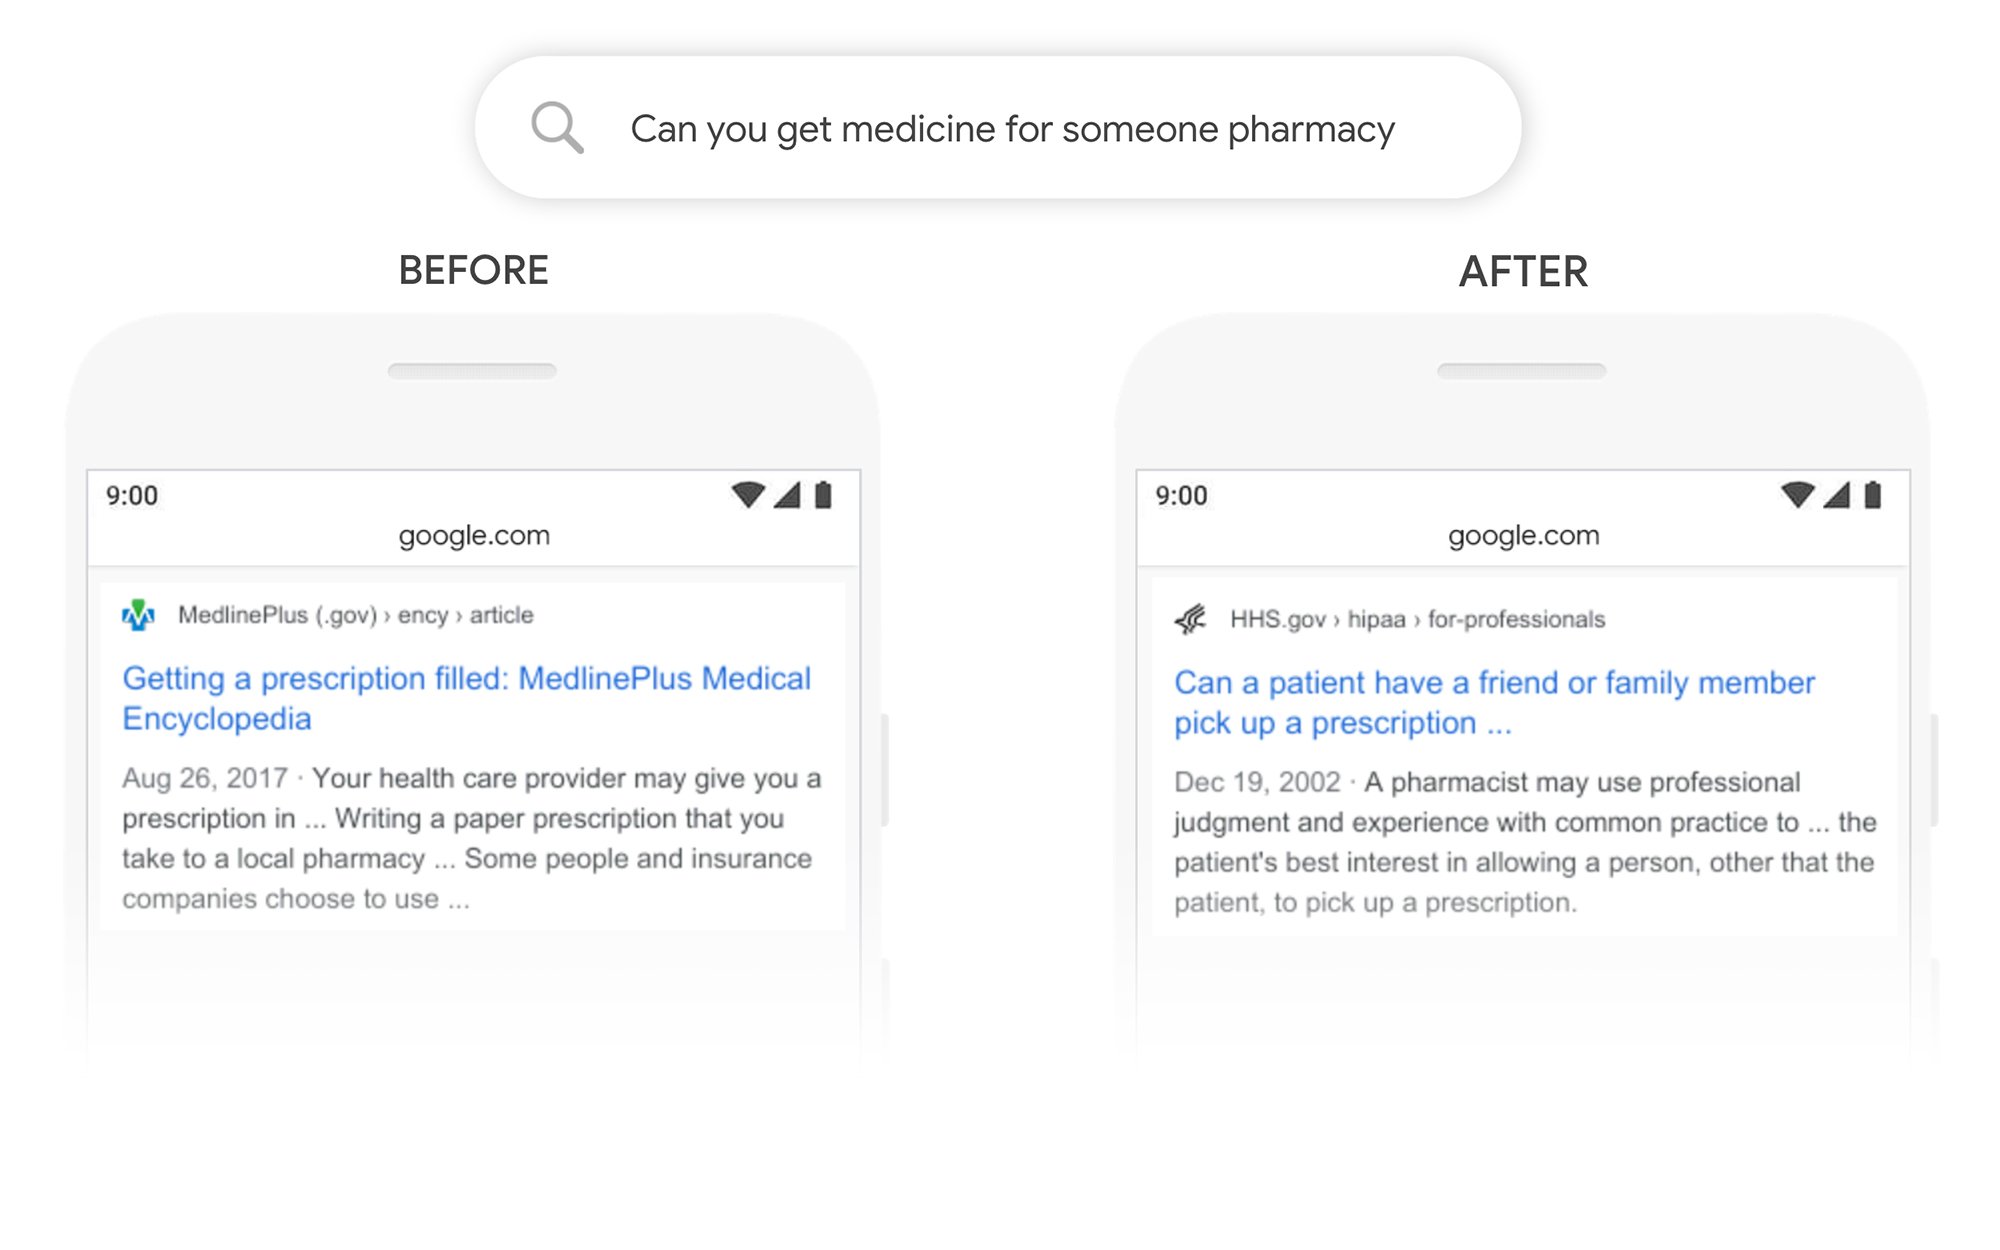 Before and after BERT comparison example from Google: Can you get medicine for someone pharmacy